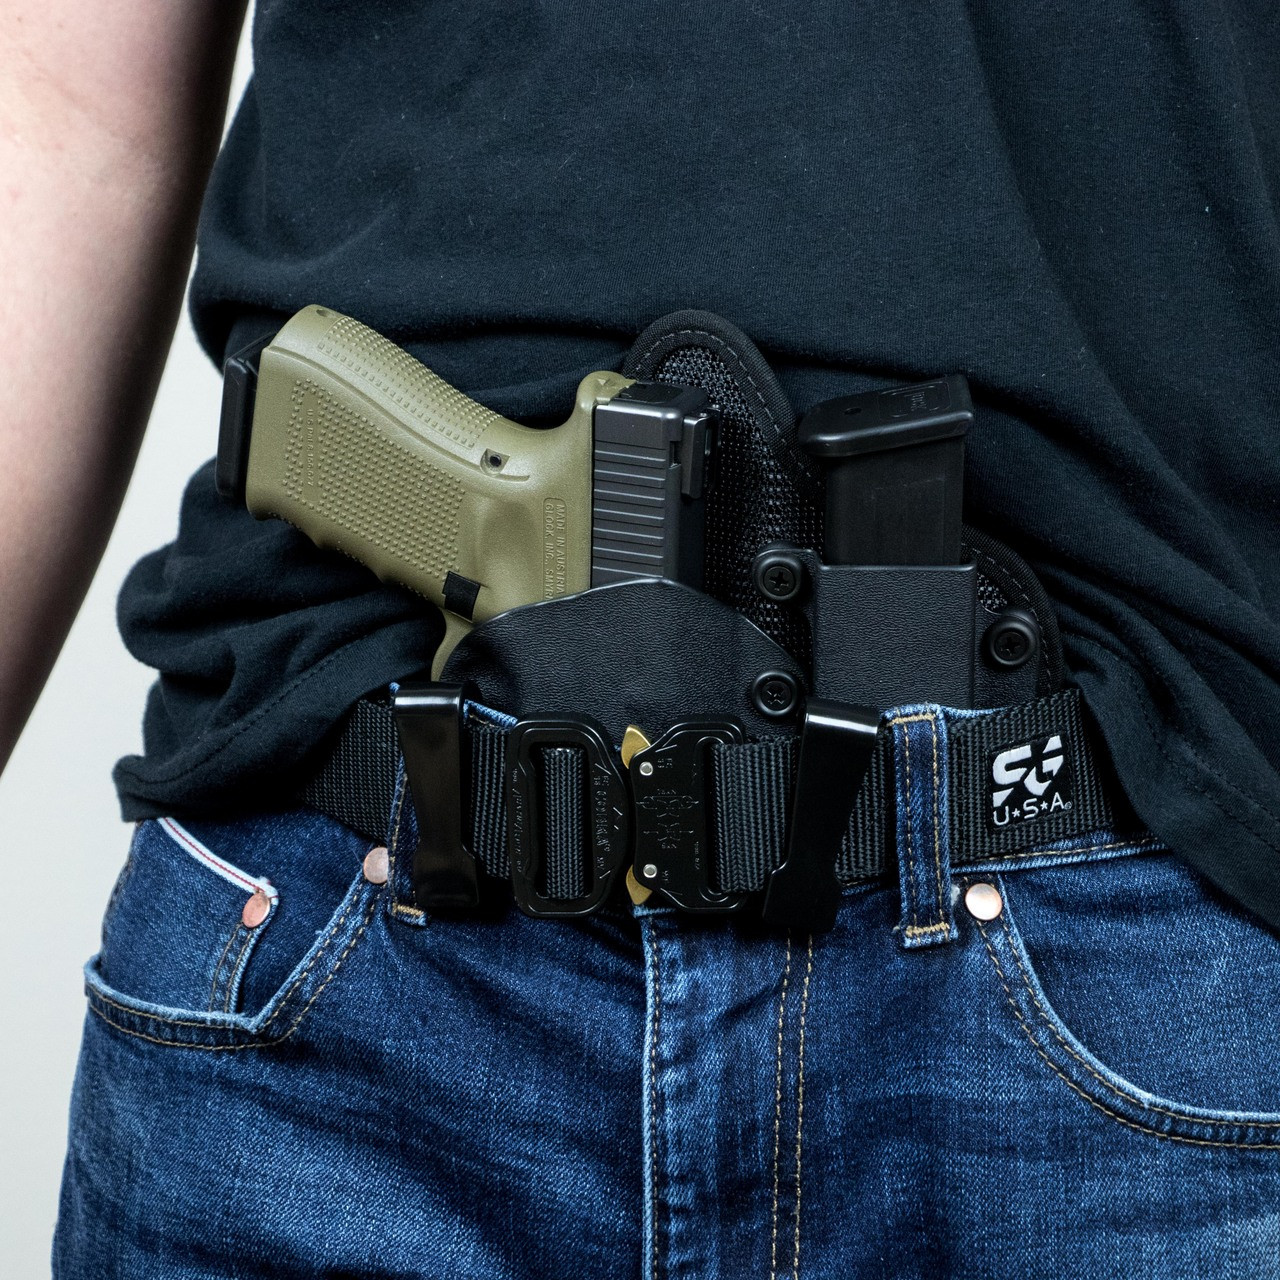 Best Concealed Carry Holster For Women - 80 Percent Arms